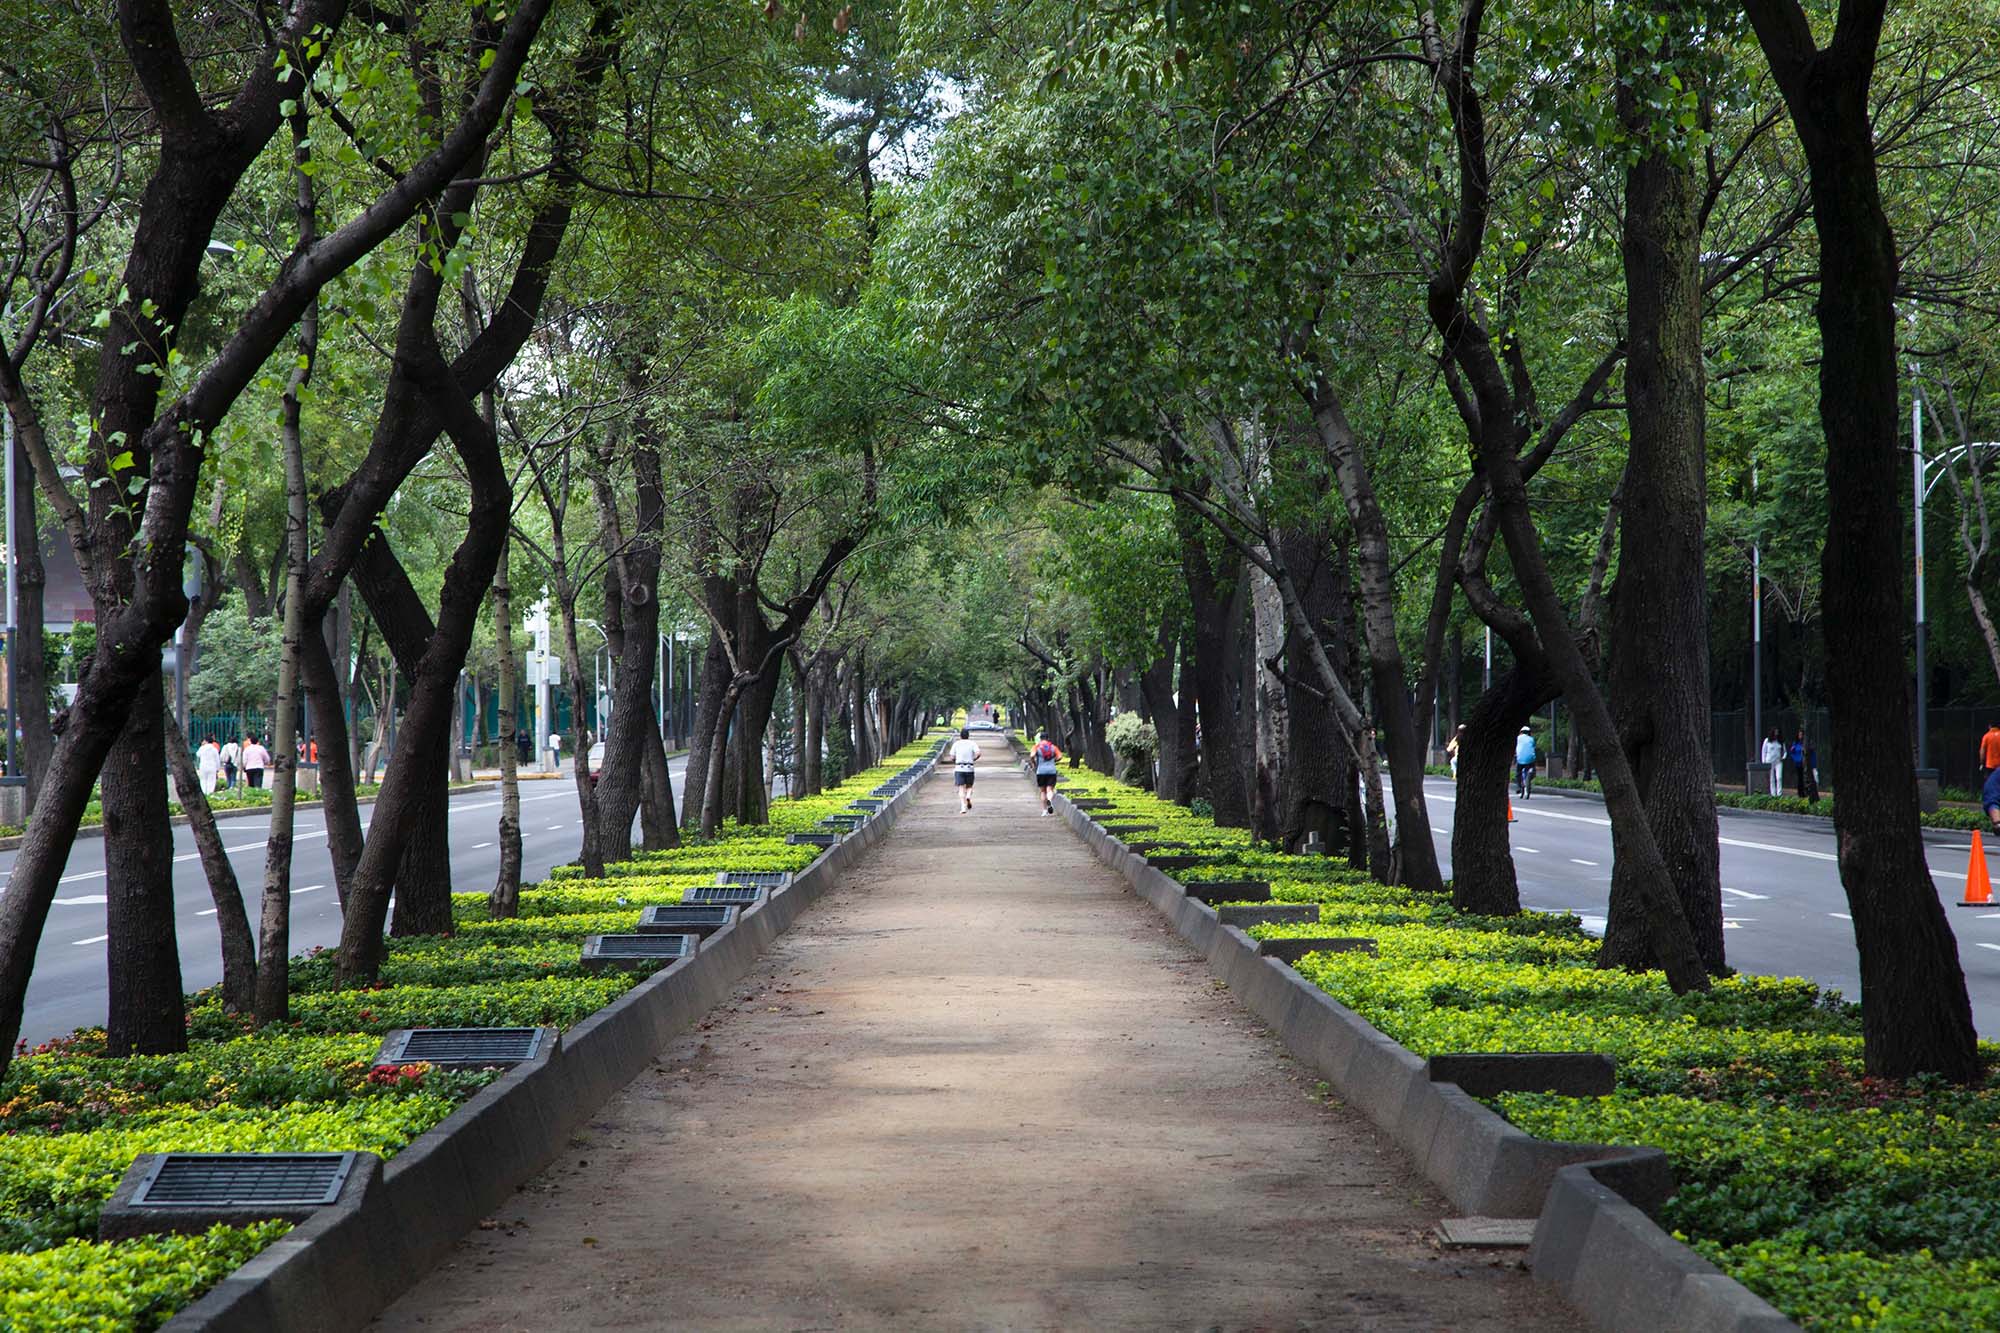 Looking down a long dirt path in the centre of an avenue flanked with planters and trees